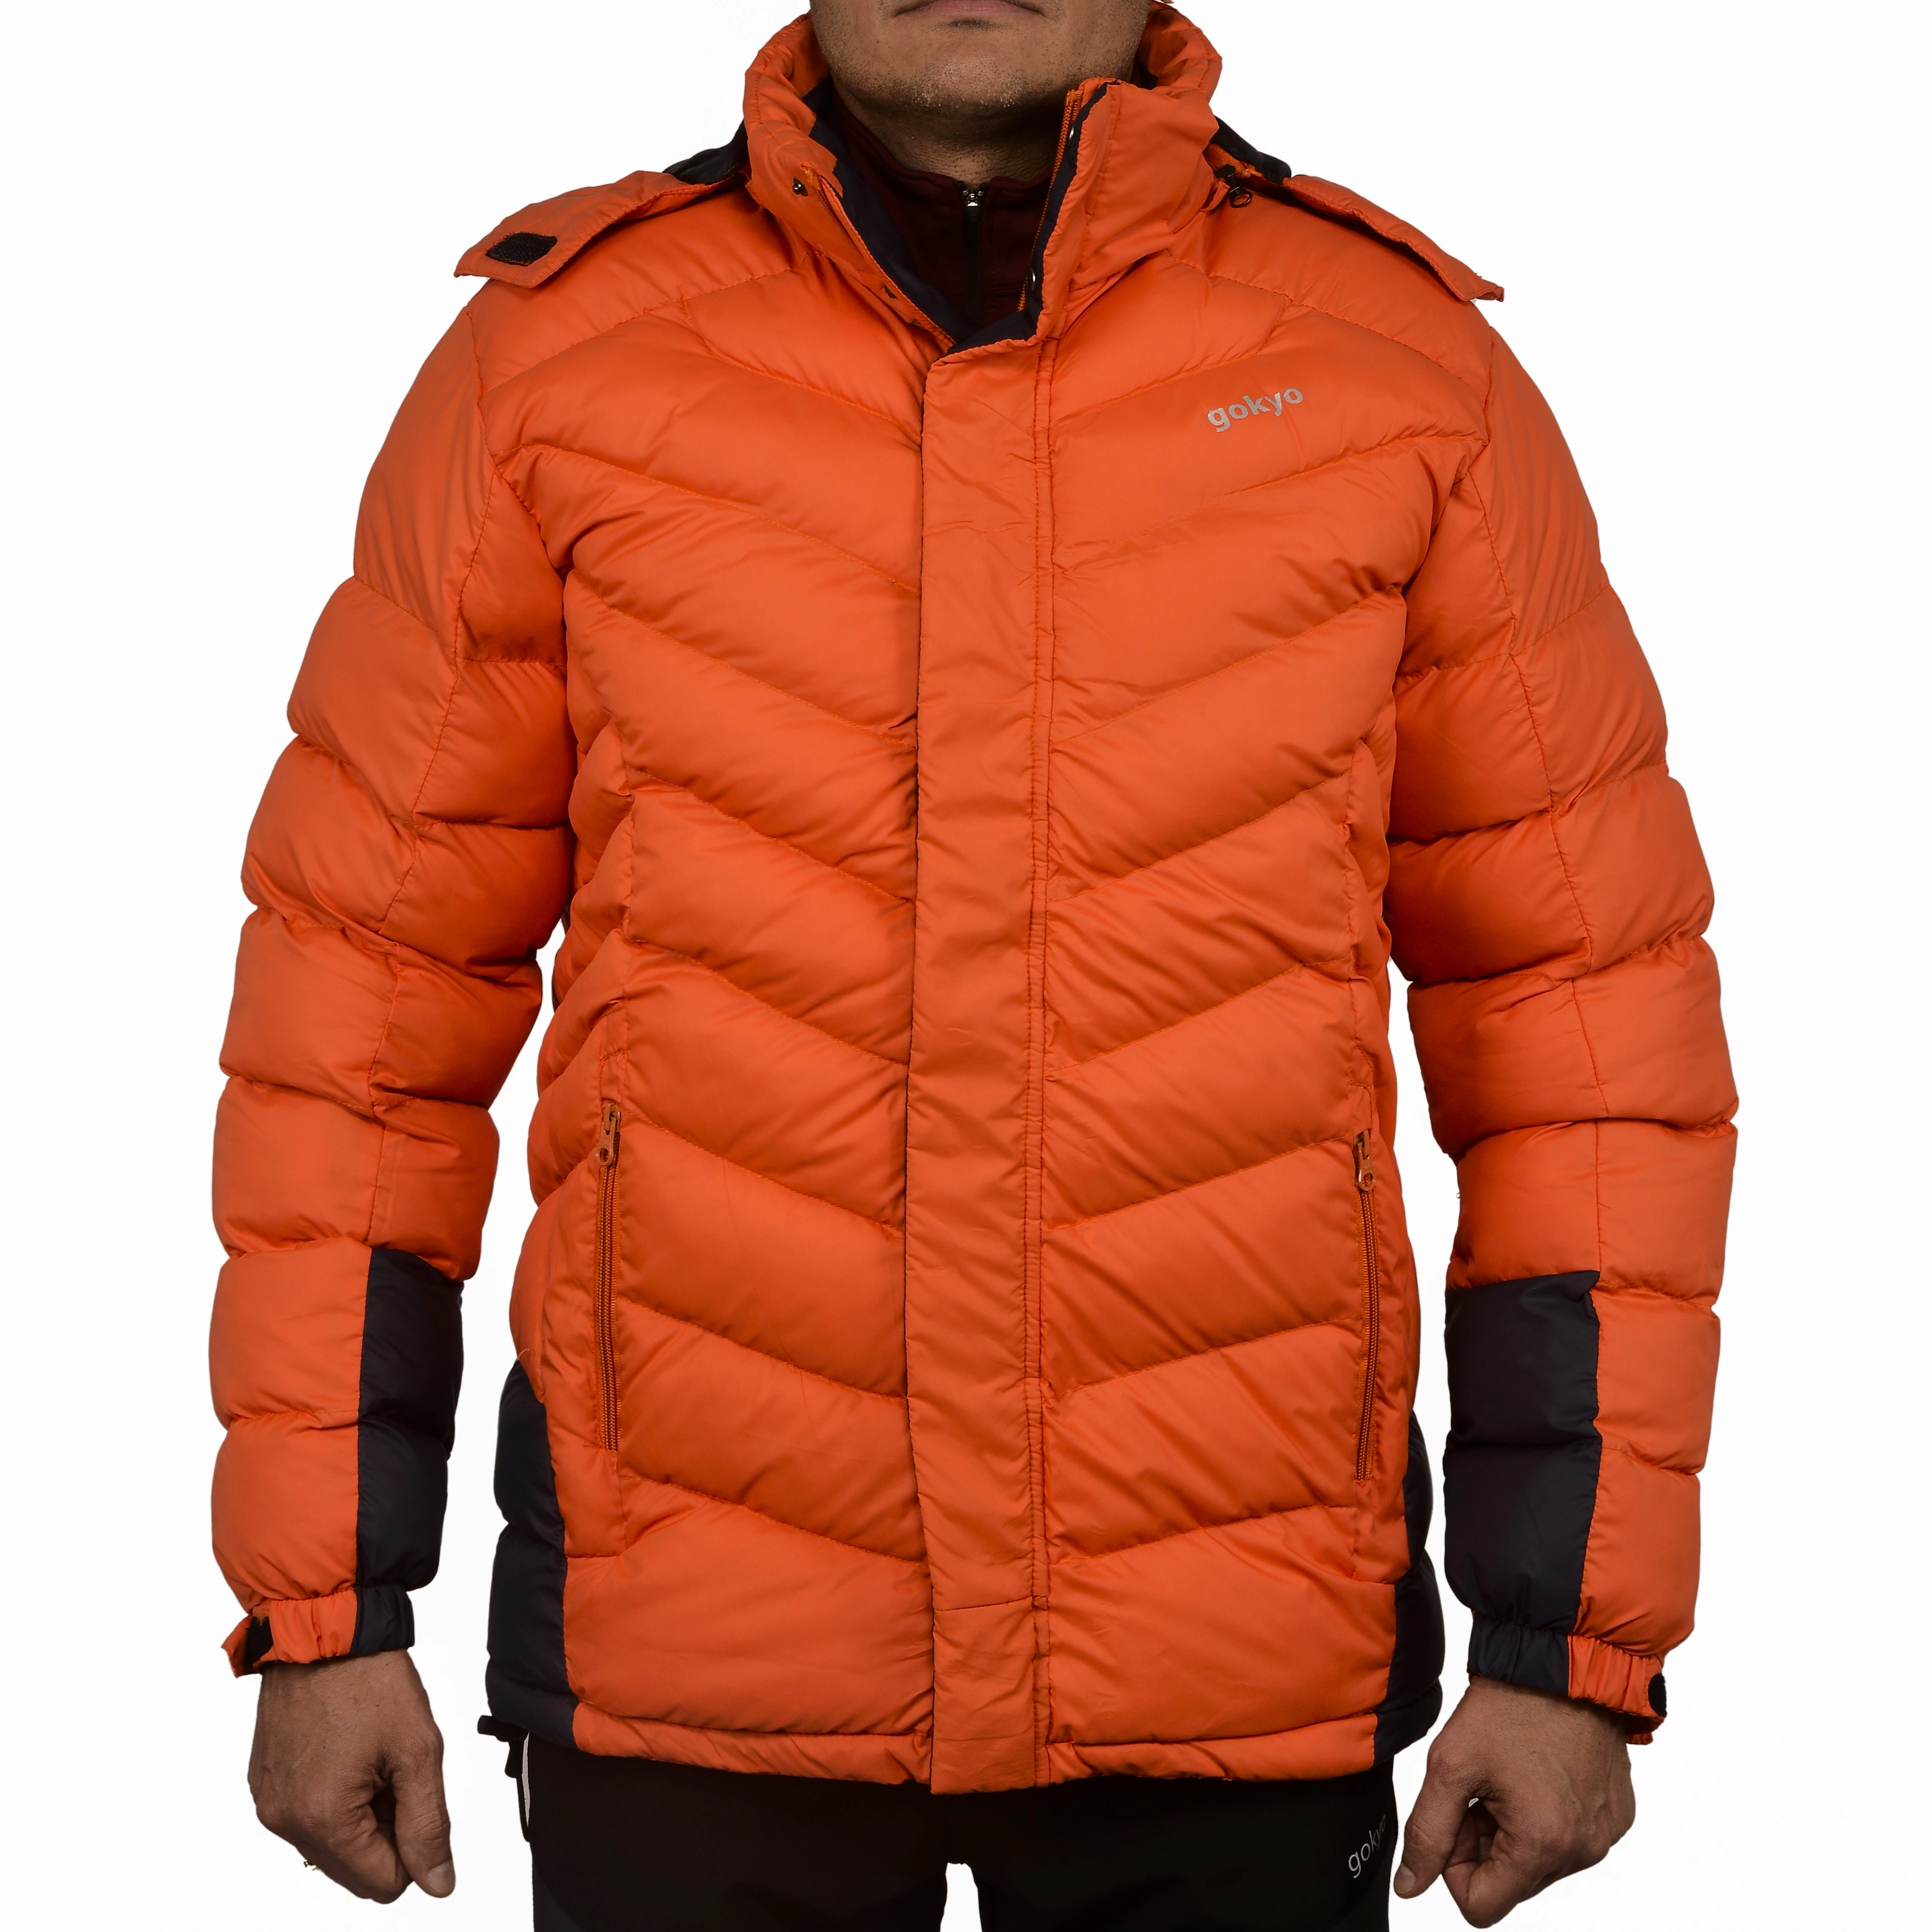 K2 Survivor Down Jacket for Men: Stylized Functionality for Extreme Cold Weather Expeditions (Up to -20°C)-230213